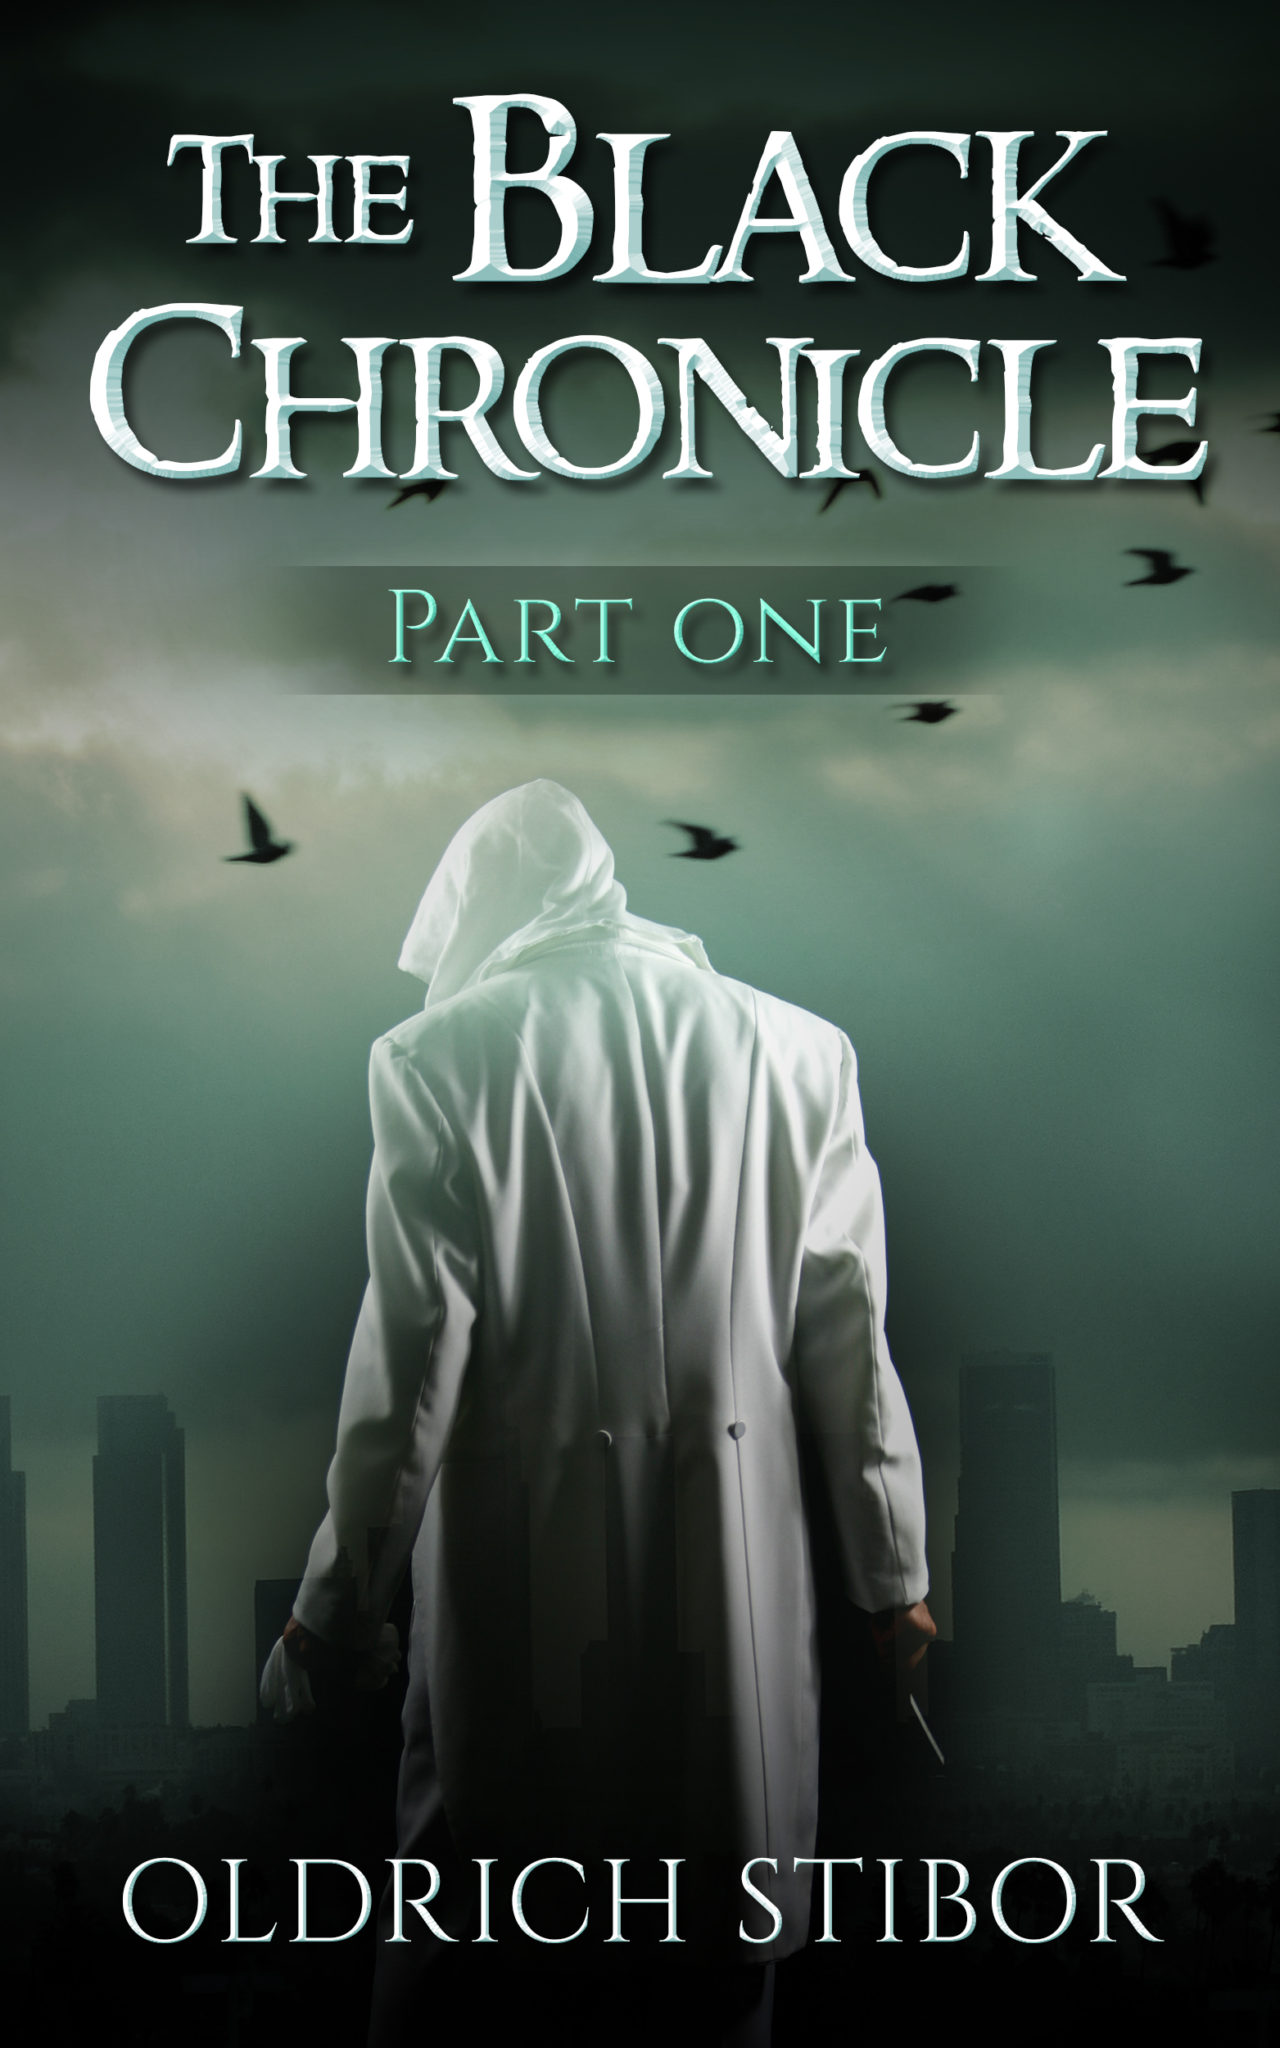 FREE: The Black Chronicle by Oldrich Stibor